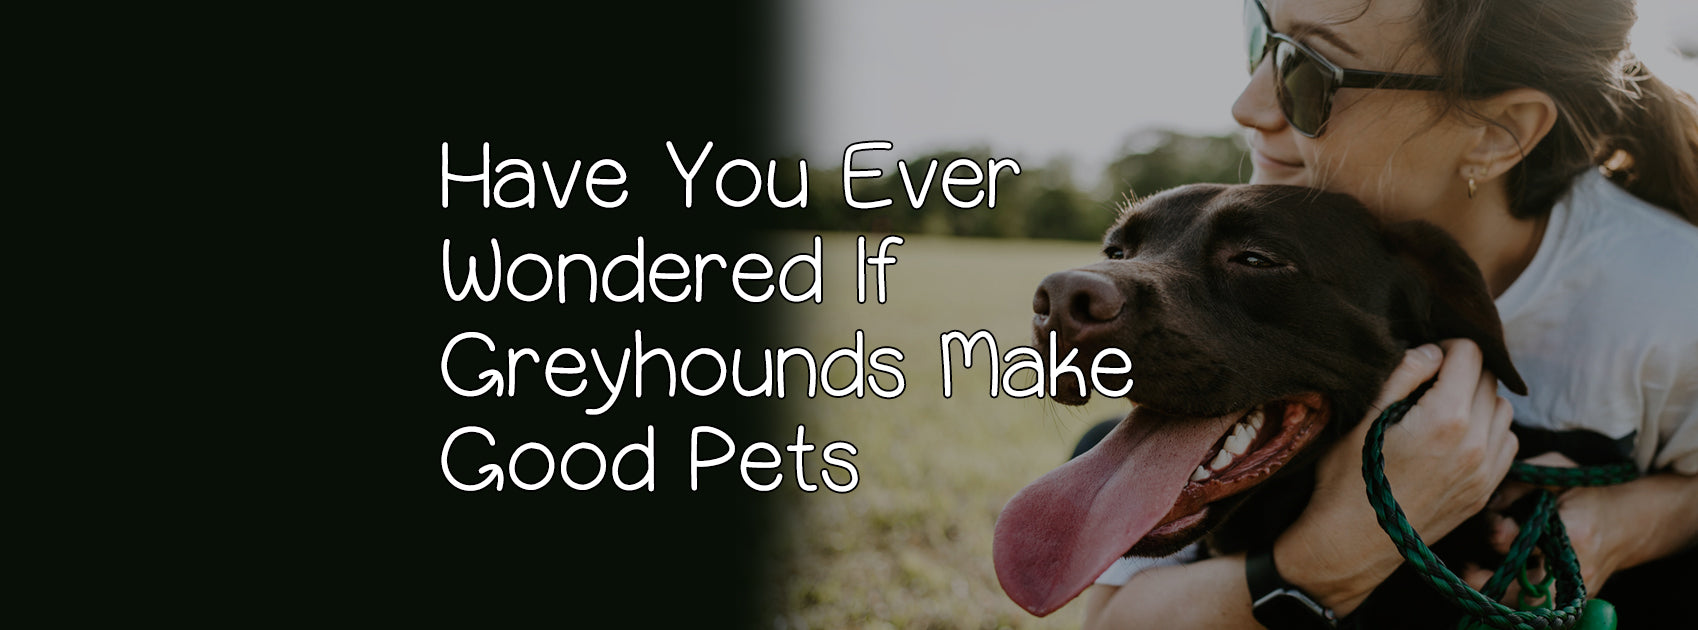 HAVE YOU EVER WONDERED IF GREYHOUNDS MAKE GOOD PETS?